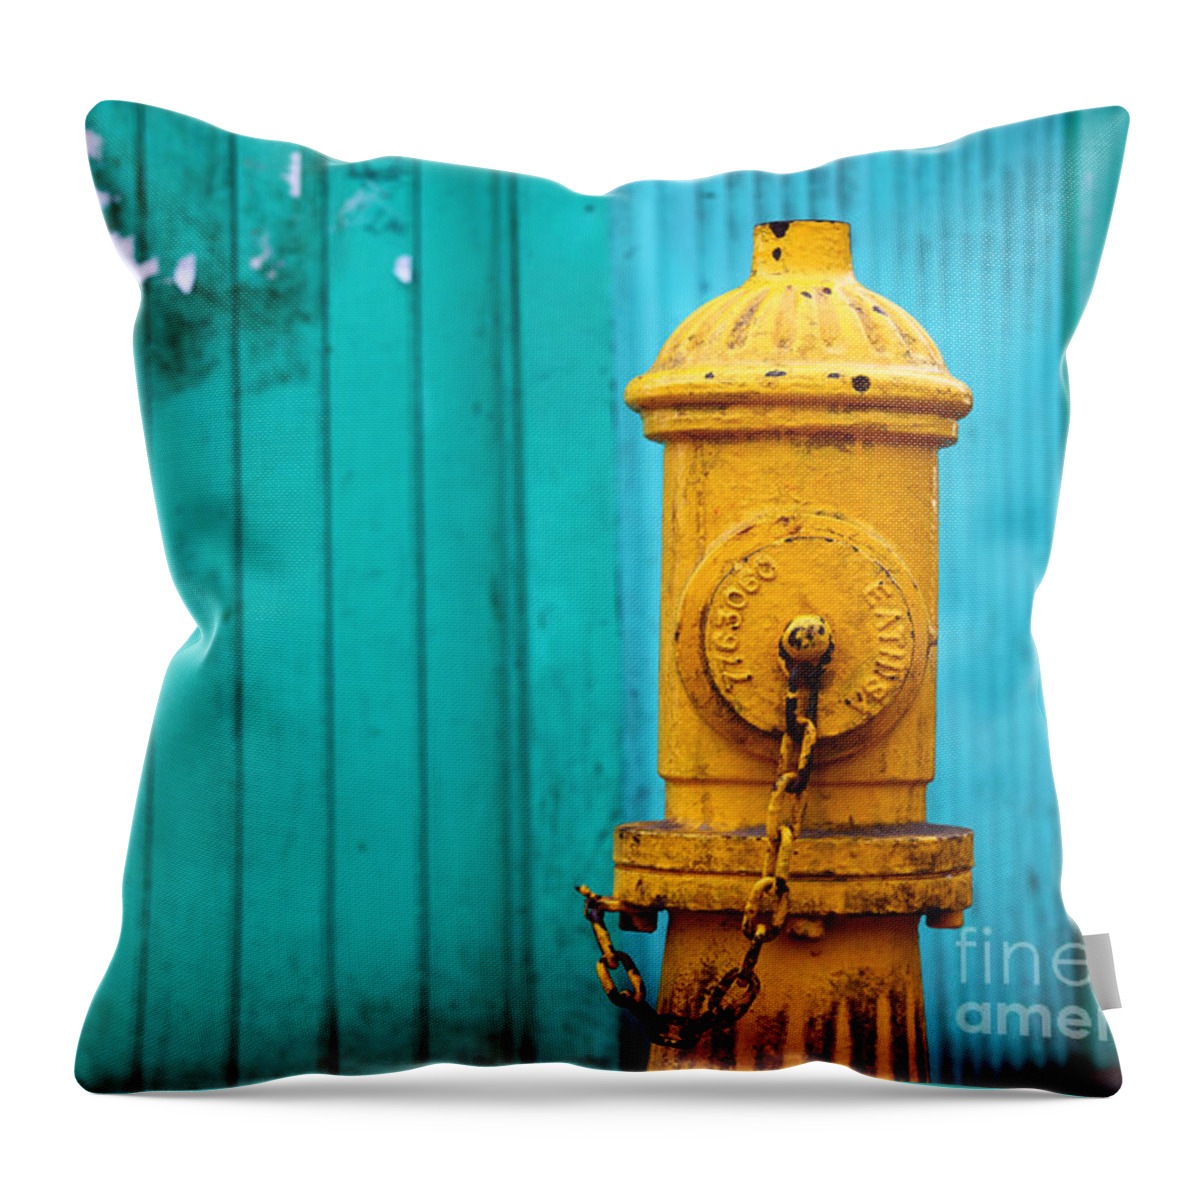 Hydrant Throw Pillow featuring the photograph Old Yellow Fire Hydrant by James Brunker